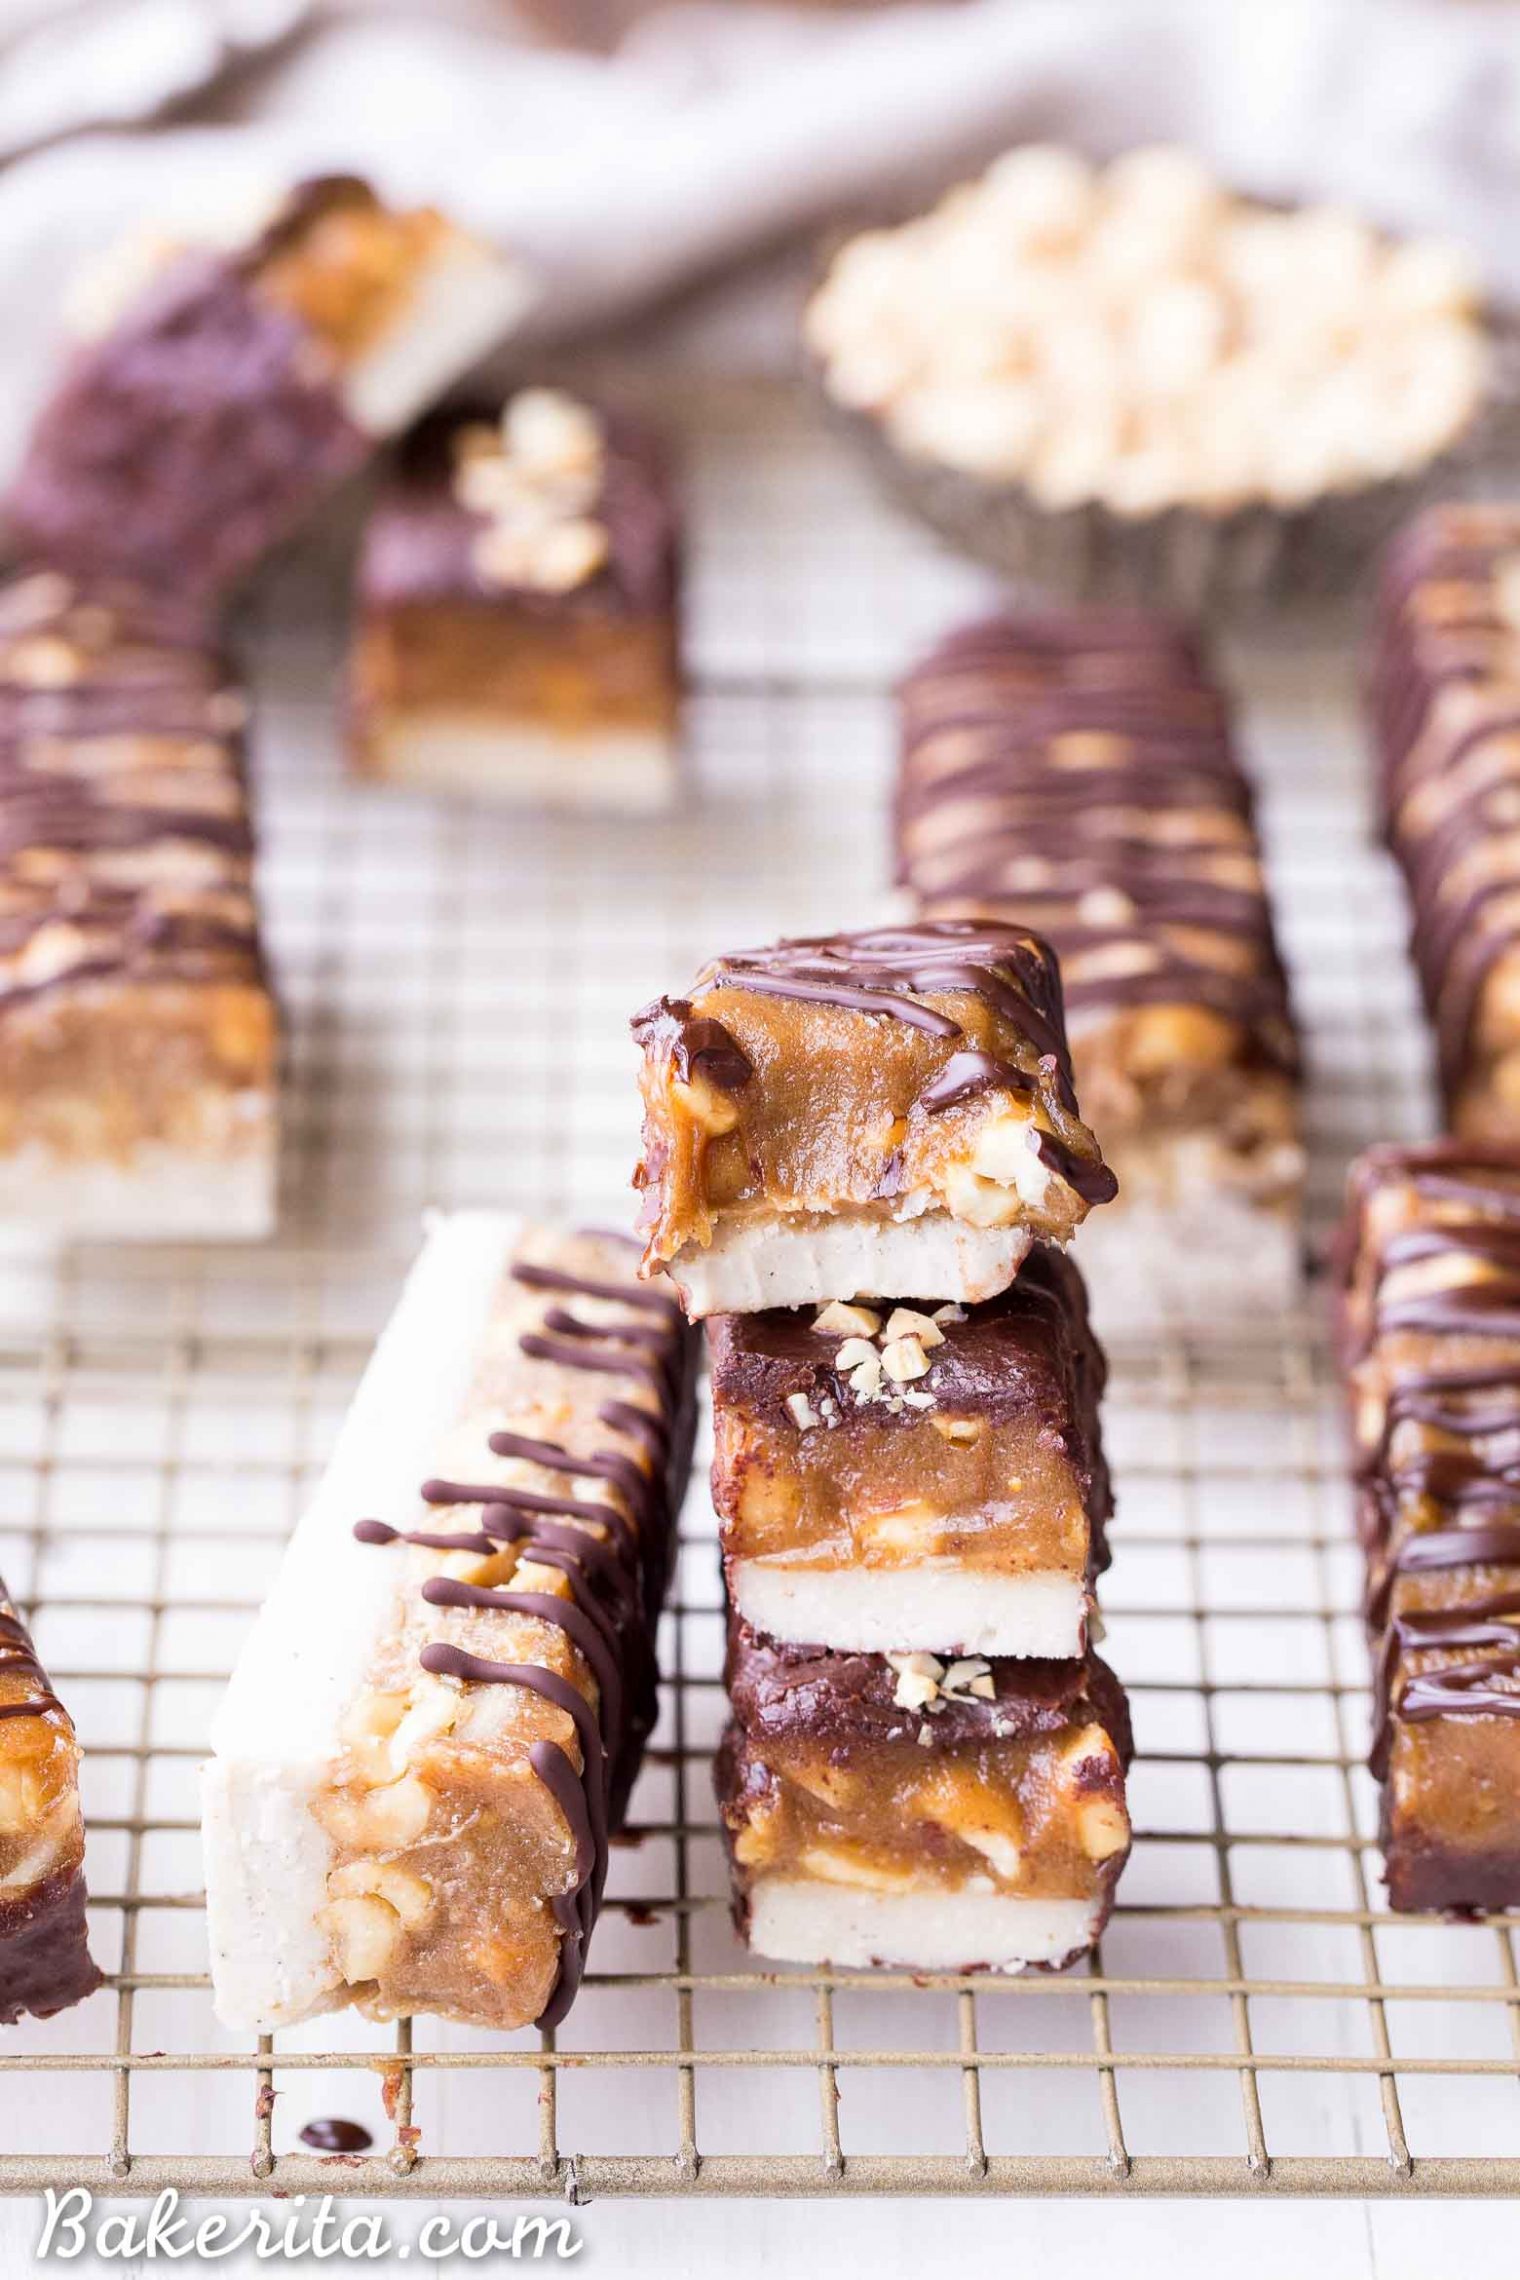 These Homemade Snickers Bars are a healthier version of the classic candy with no baking required! These gluten-free and vegan candy bars have a layer of raw nougat, topped with a peanut date caramel, all dunked in homemade chocolate.